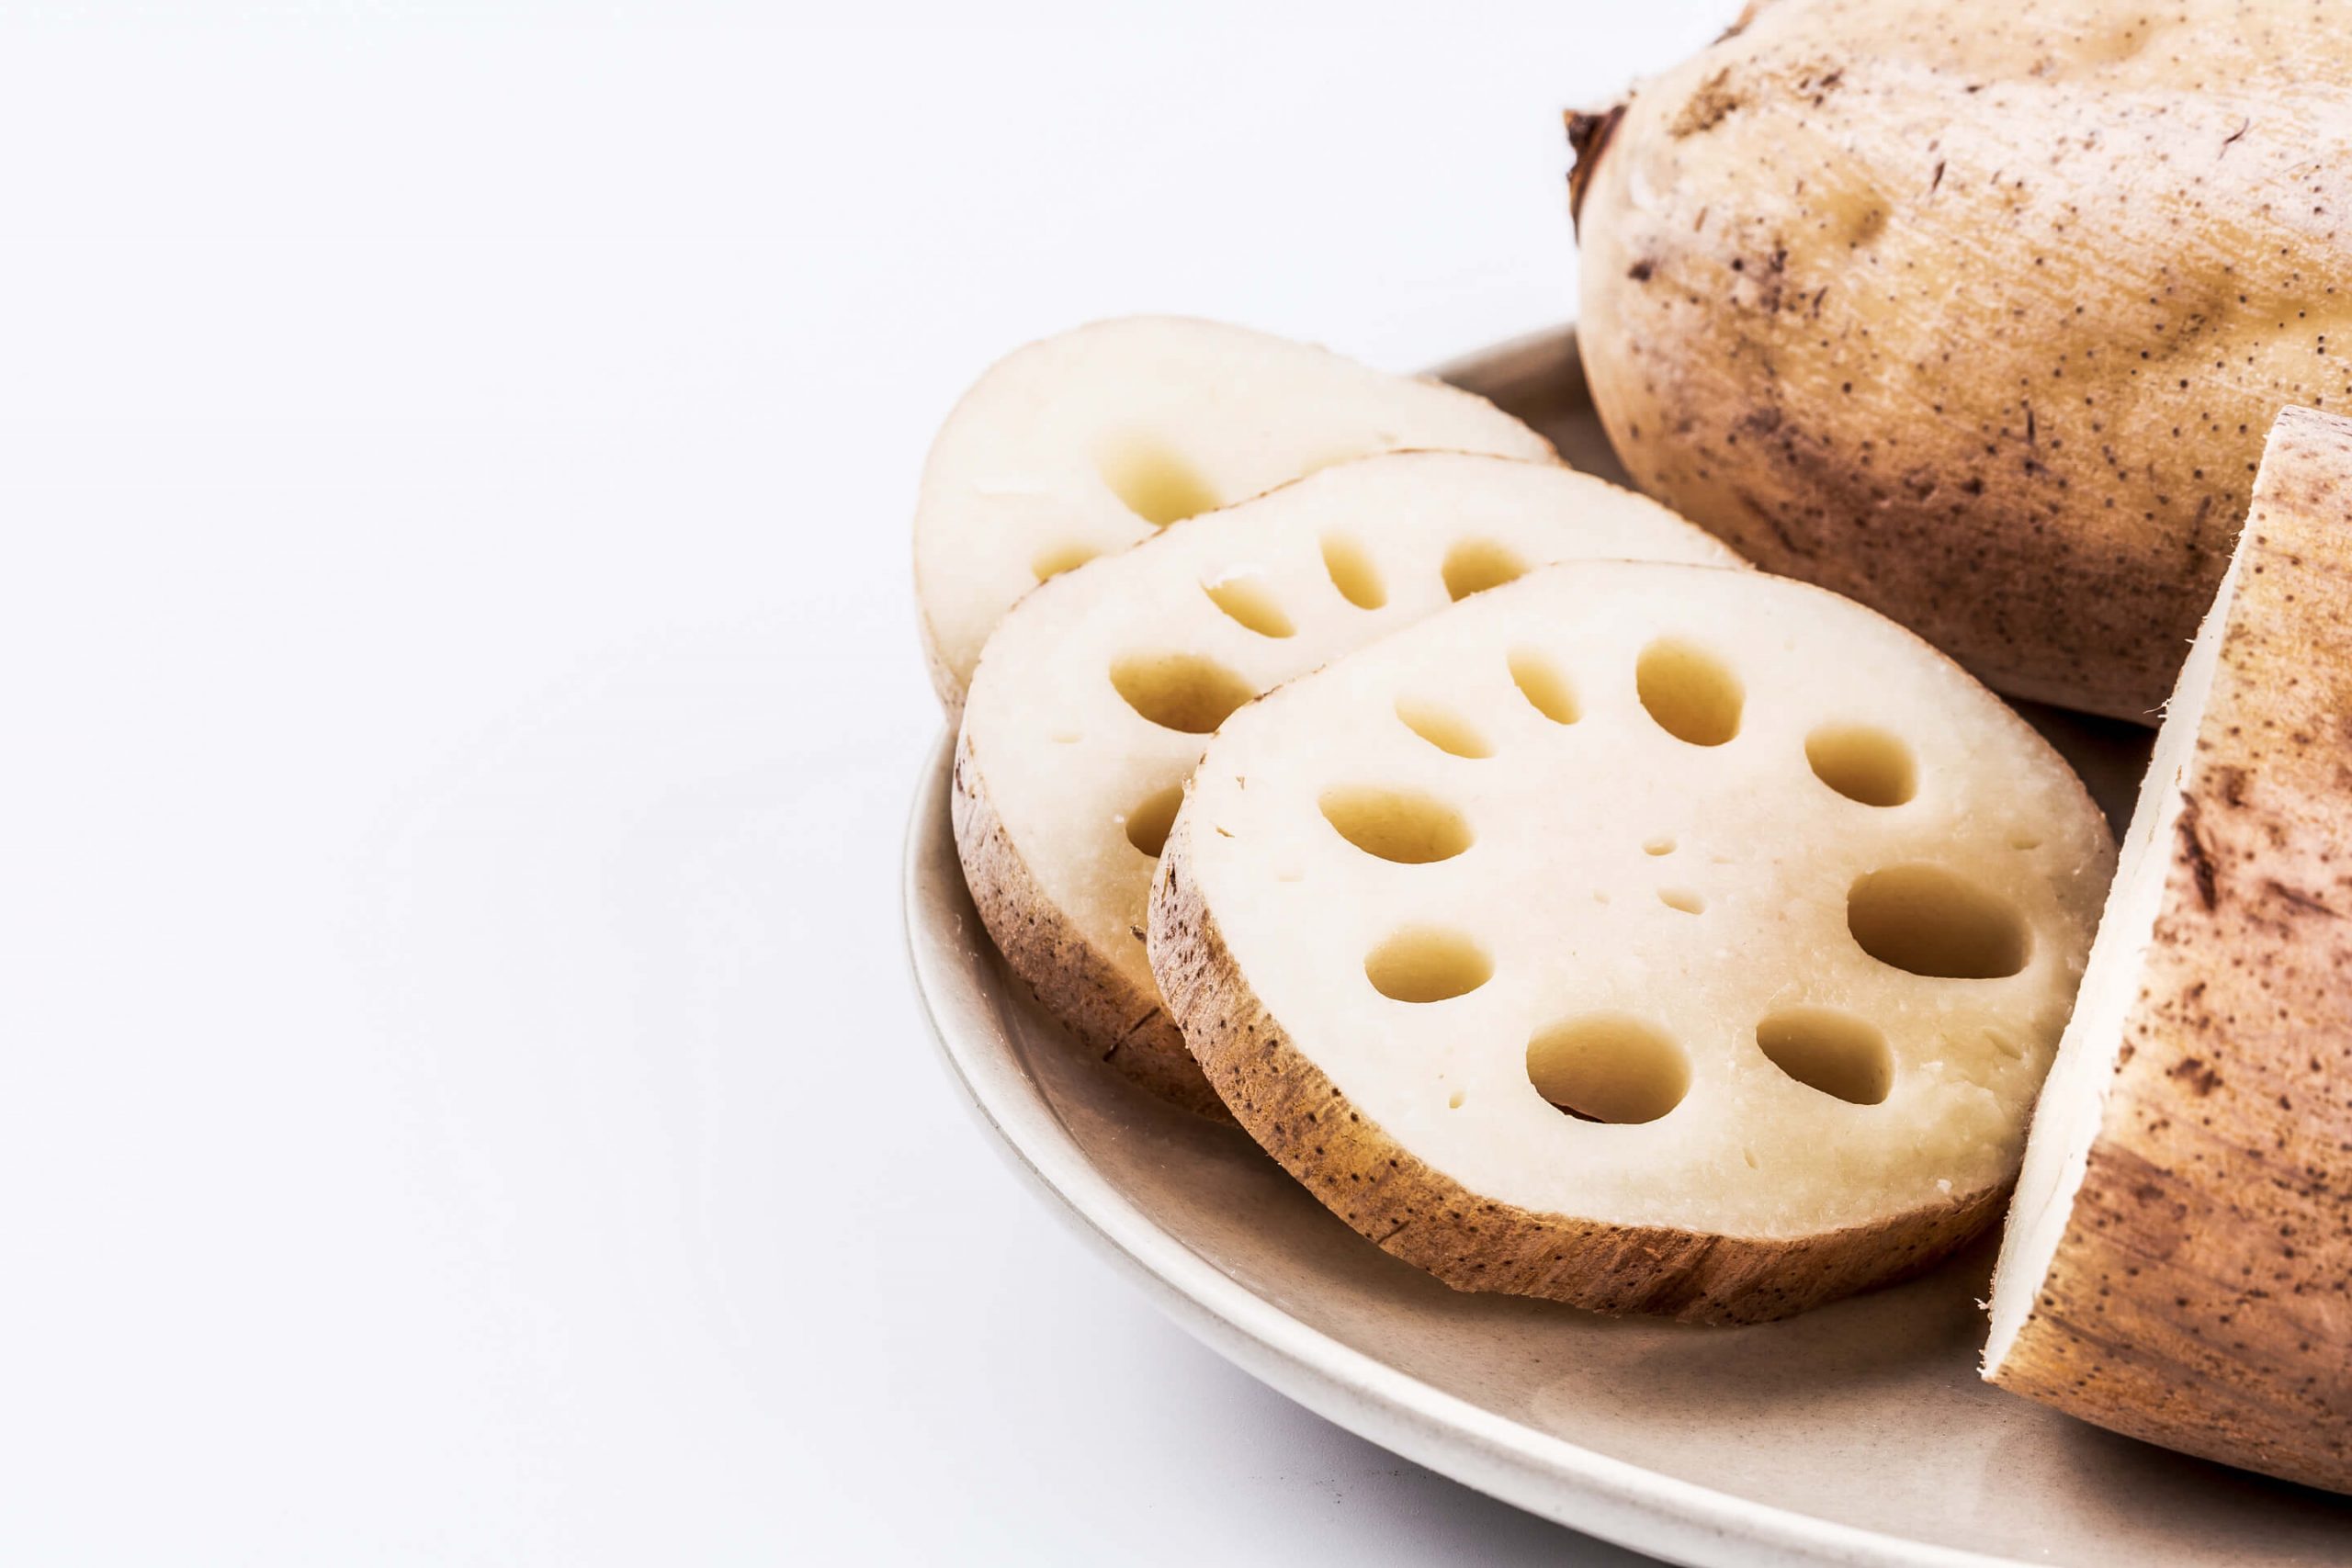 Lotus root thin yellowish discs with pretty hole pattern